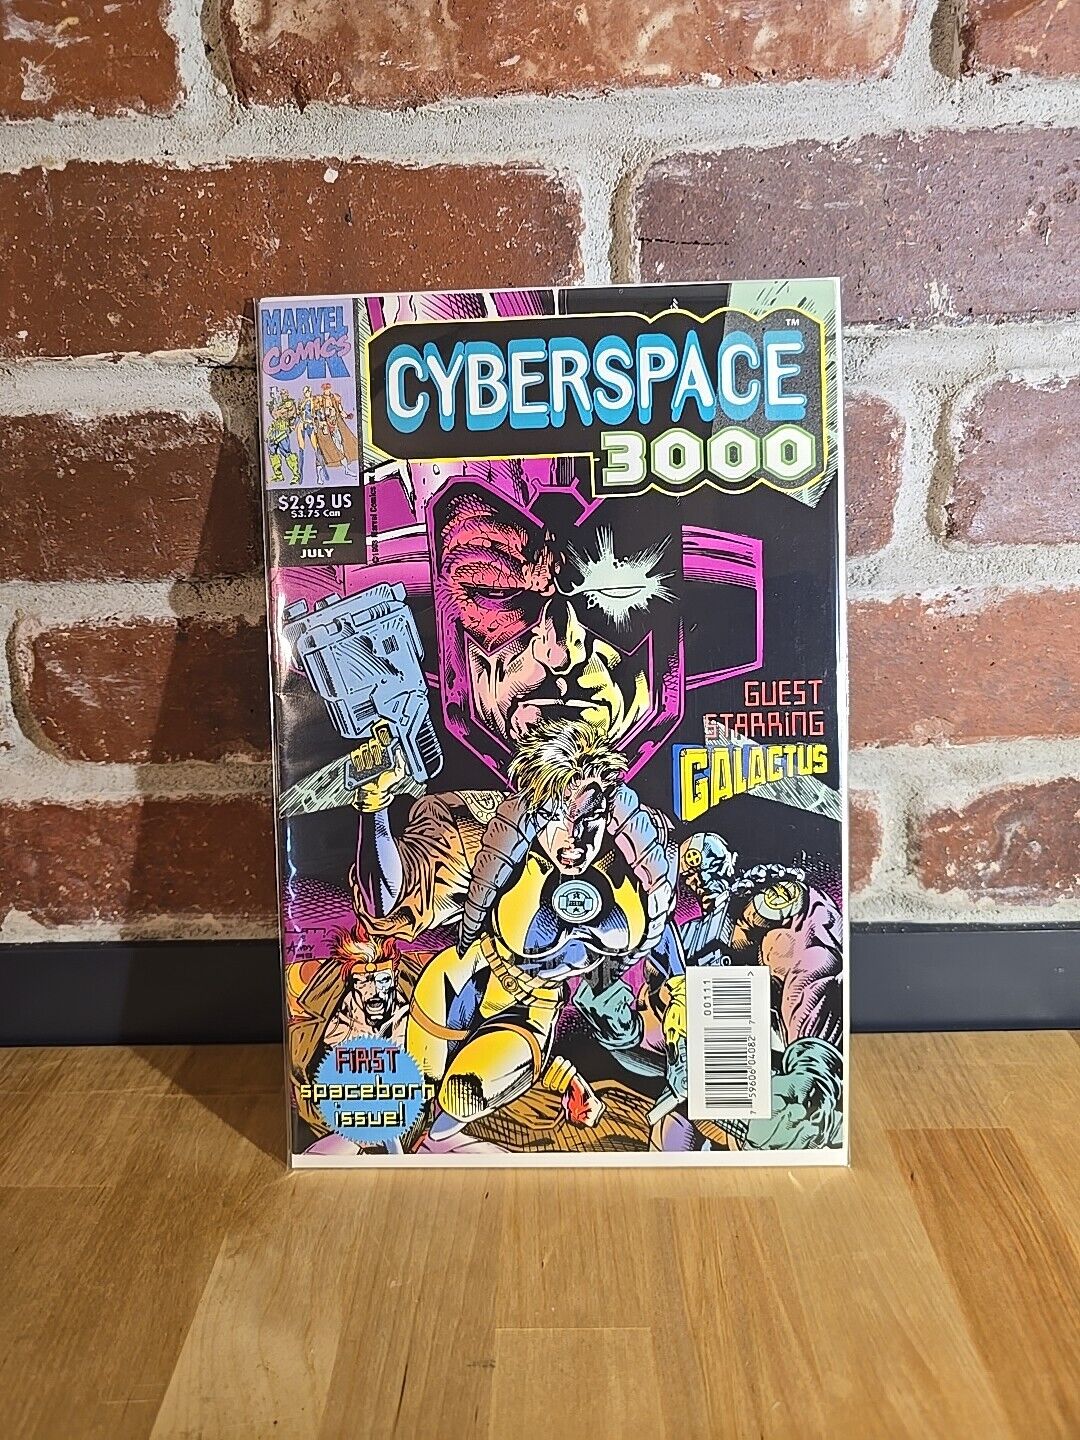 CYBERSPACE 3000 # 1 Guest Staring - GALACTUS, July 1993 Marvel Comics Comic Book